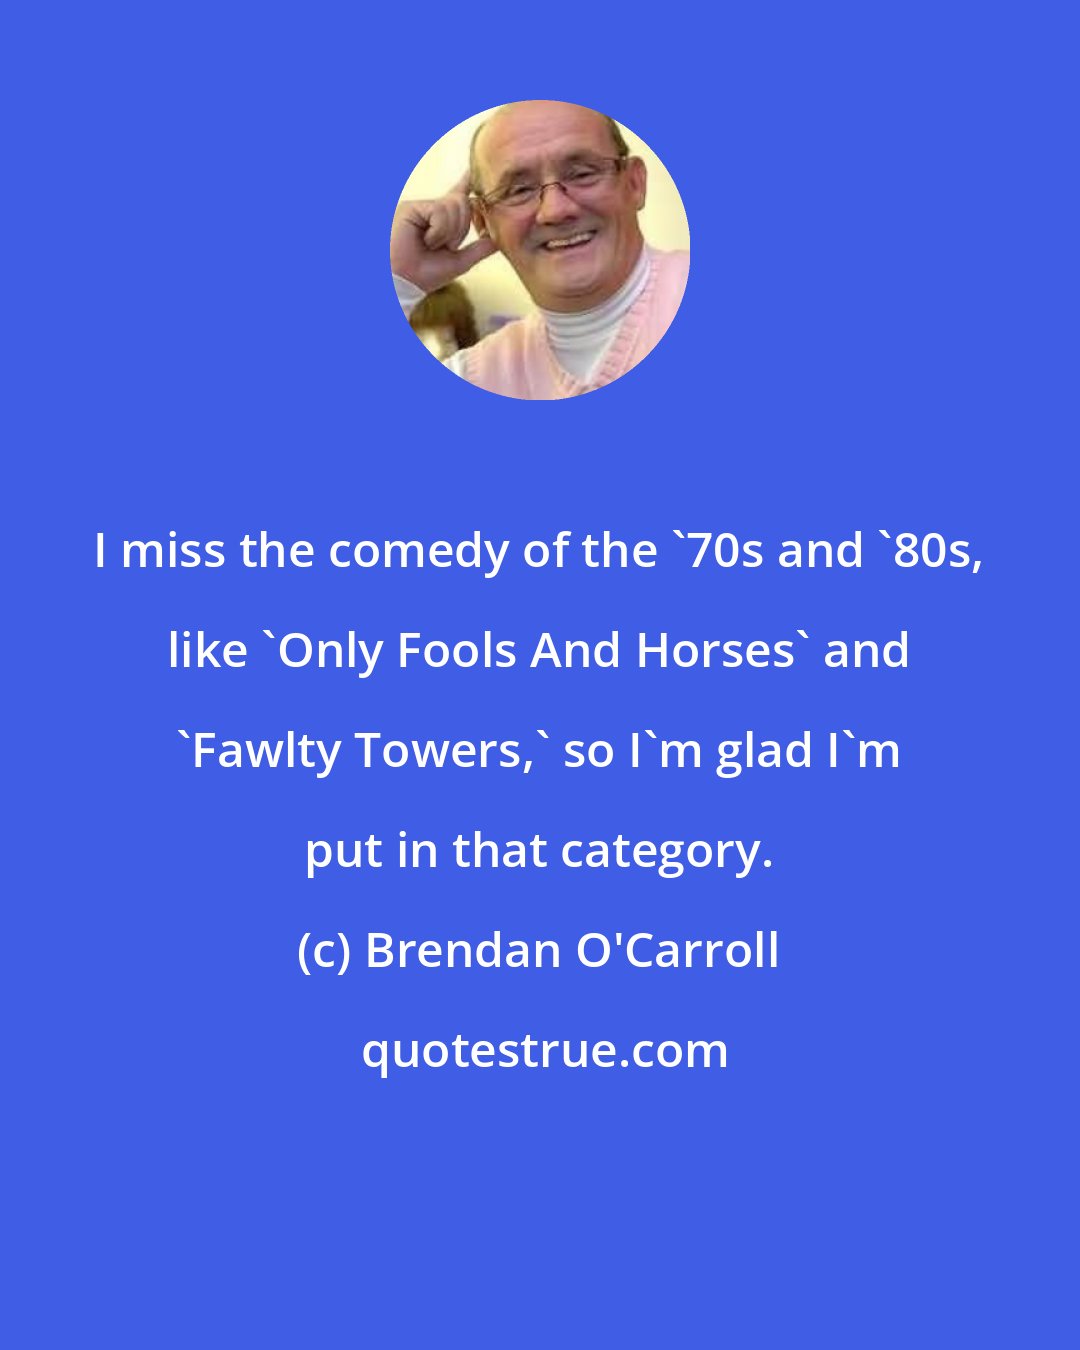 Brendan O'Carroll: I miss the comedy of the '70s and '80s, like 'Only Fools And Horses' and 'Fawlty Towers,' so I'm glad I'm put in that category.